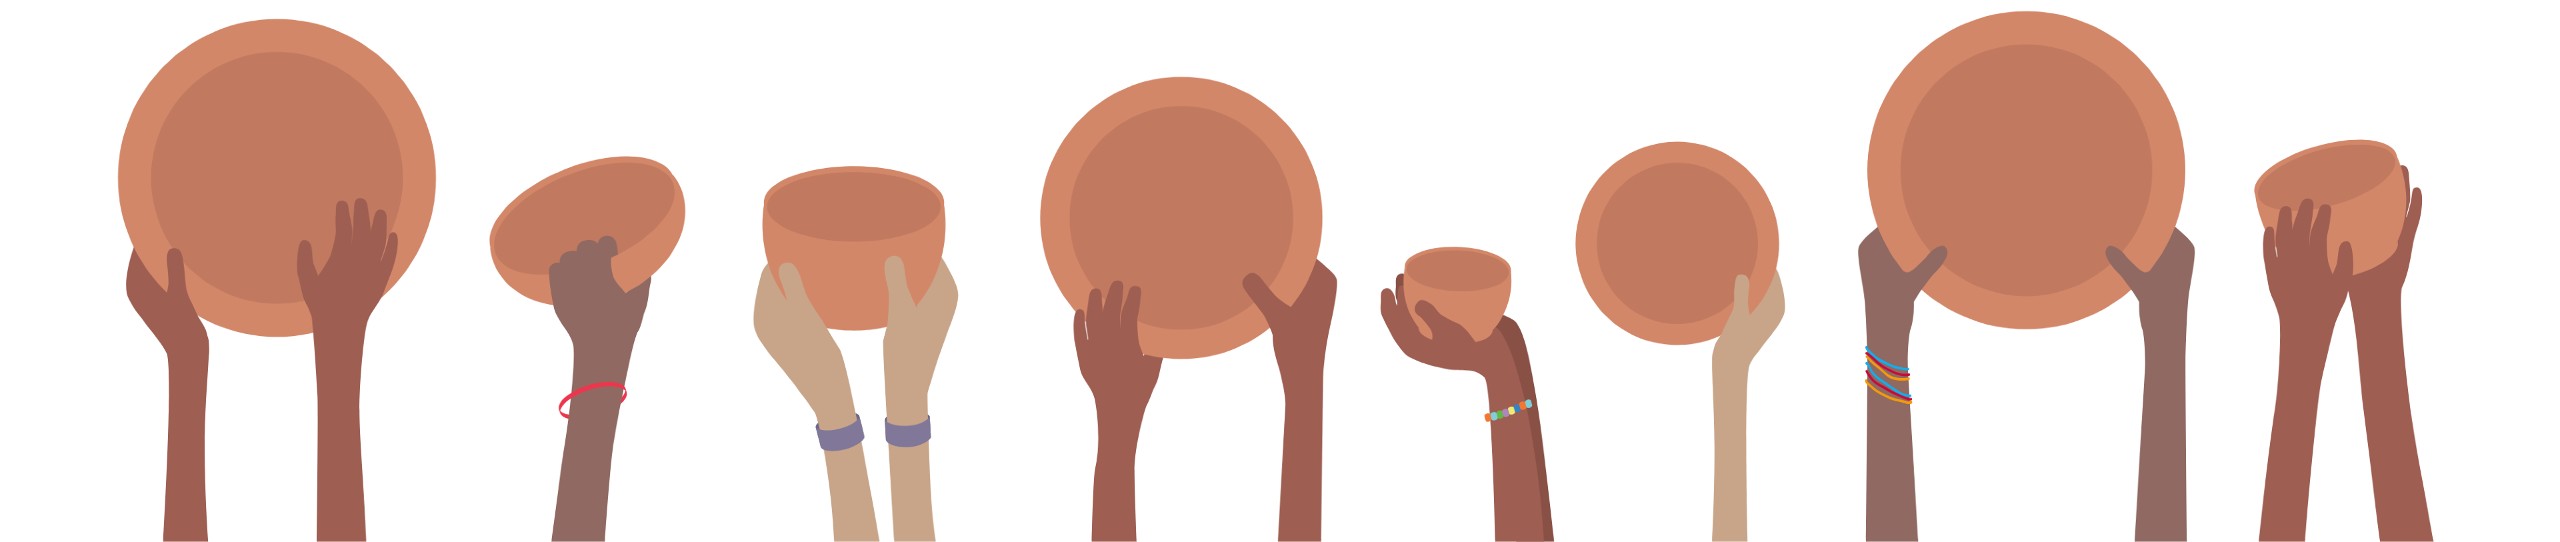 Illustration of hands holding empty plates and bowls.